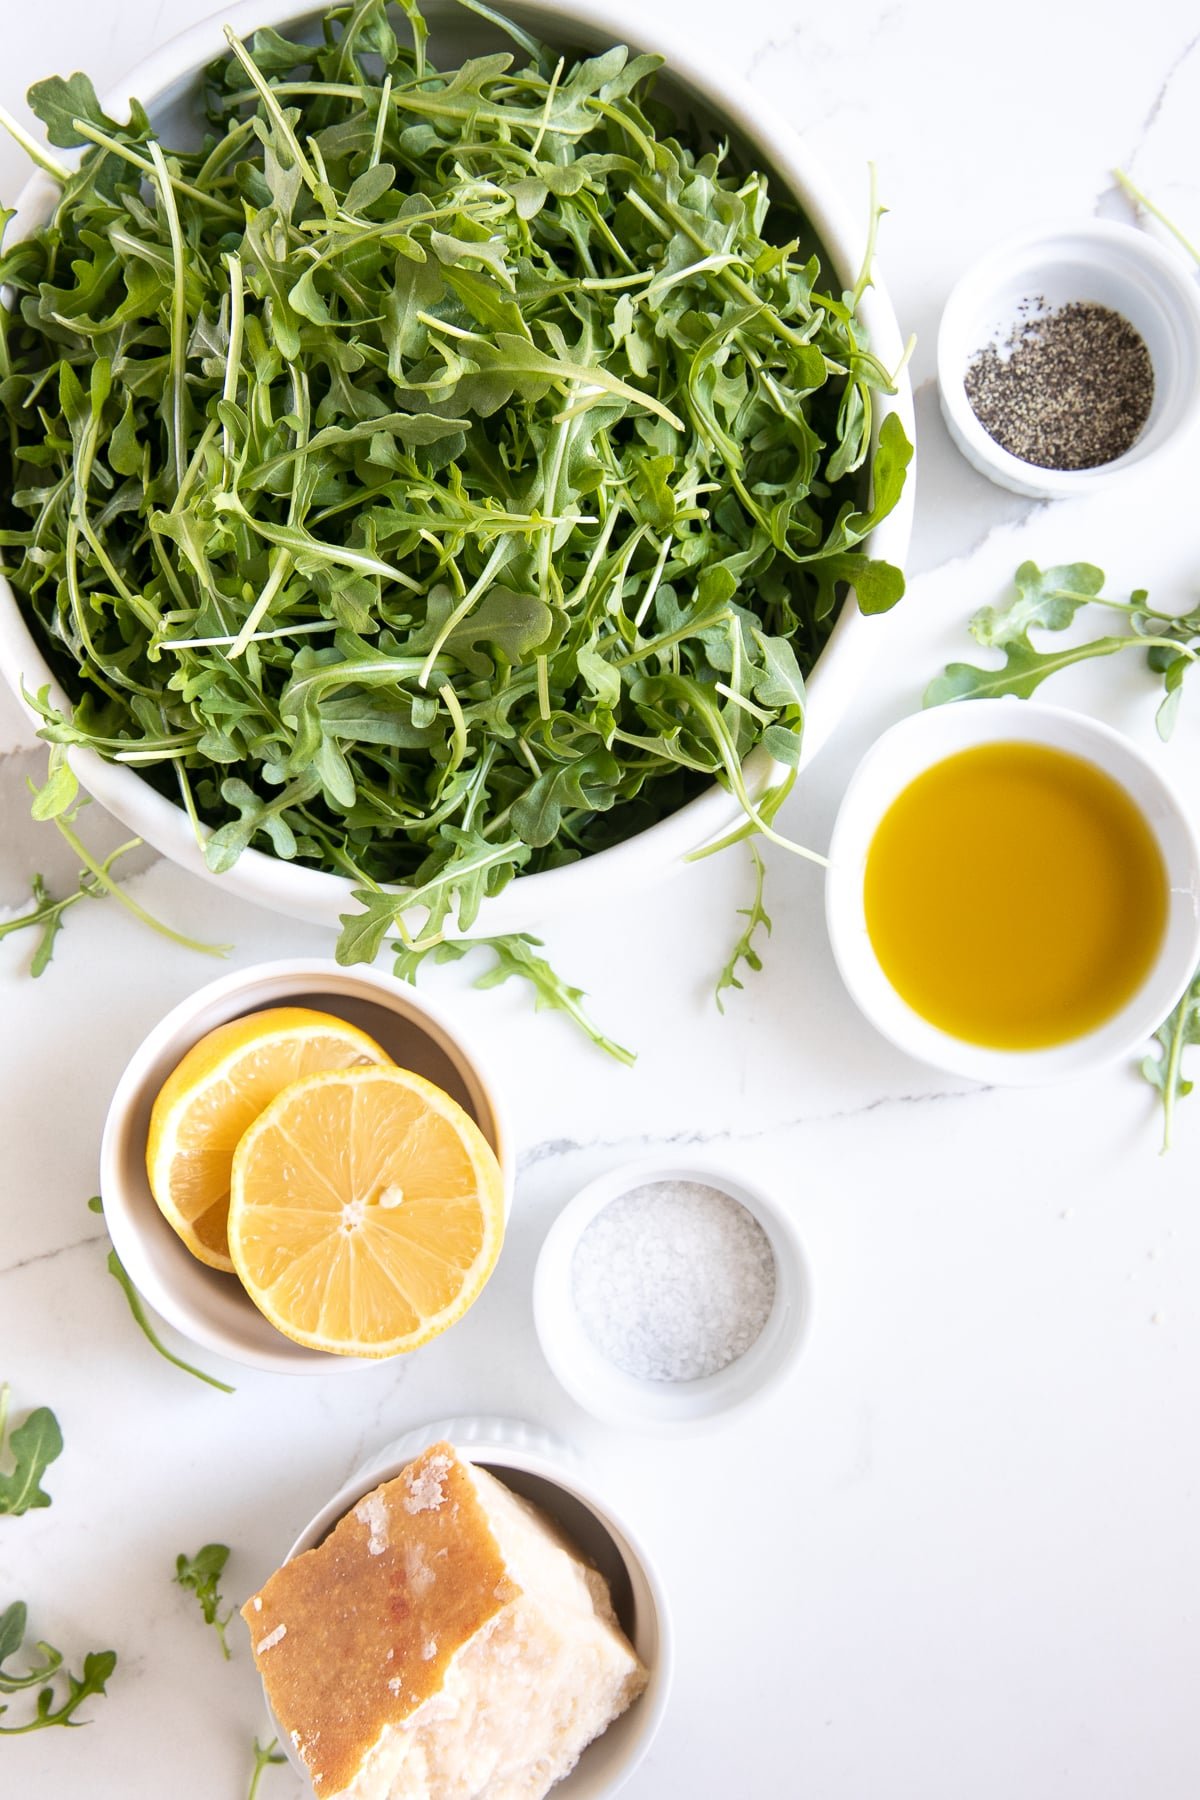 Ingredients for simple arugula salad in individual serving dishes.